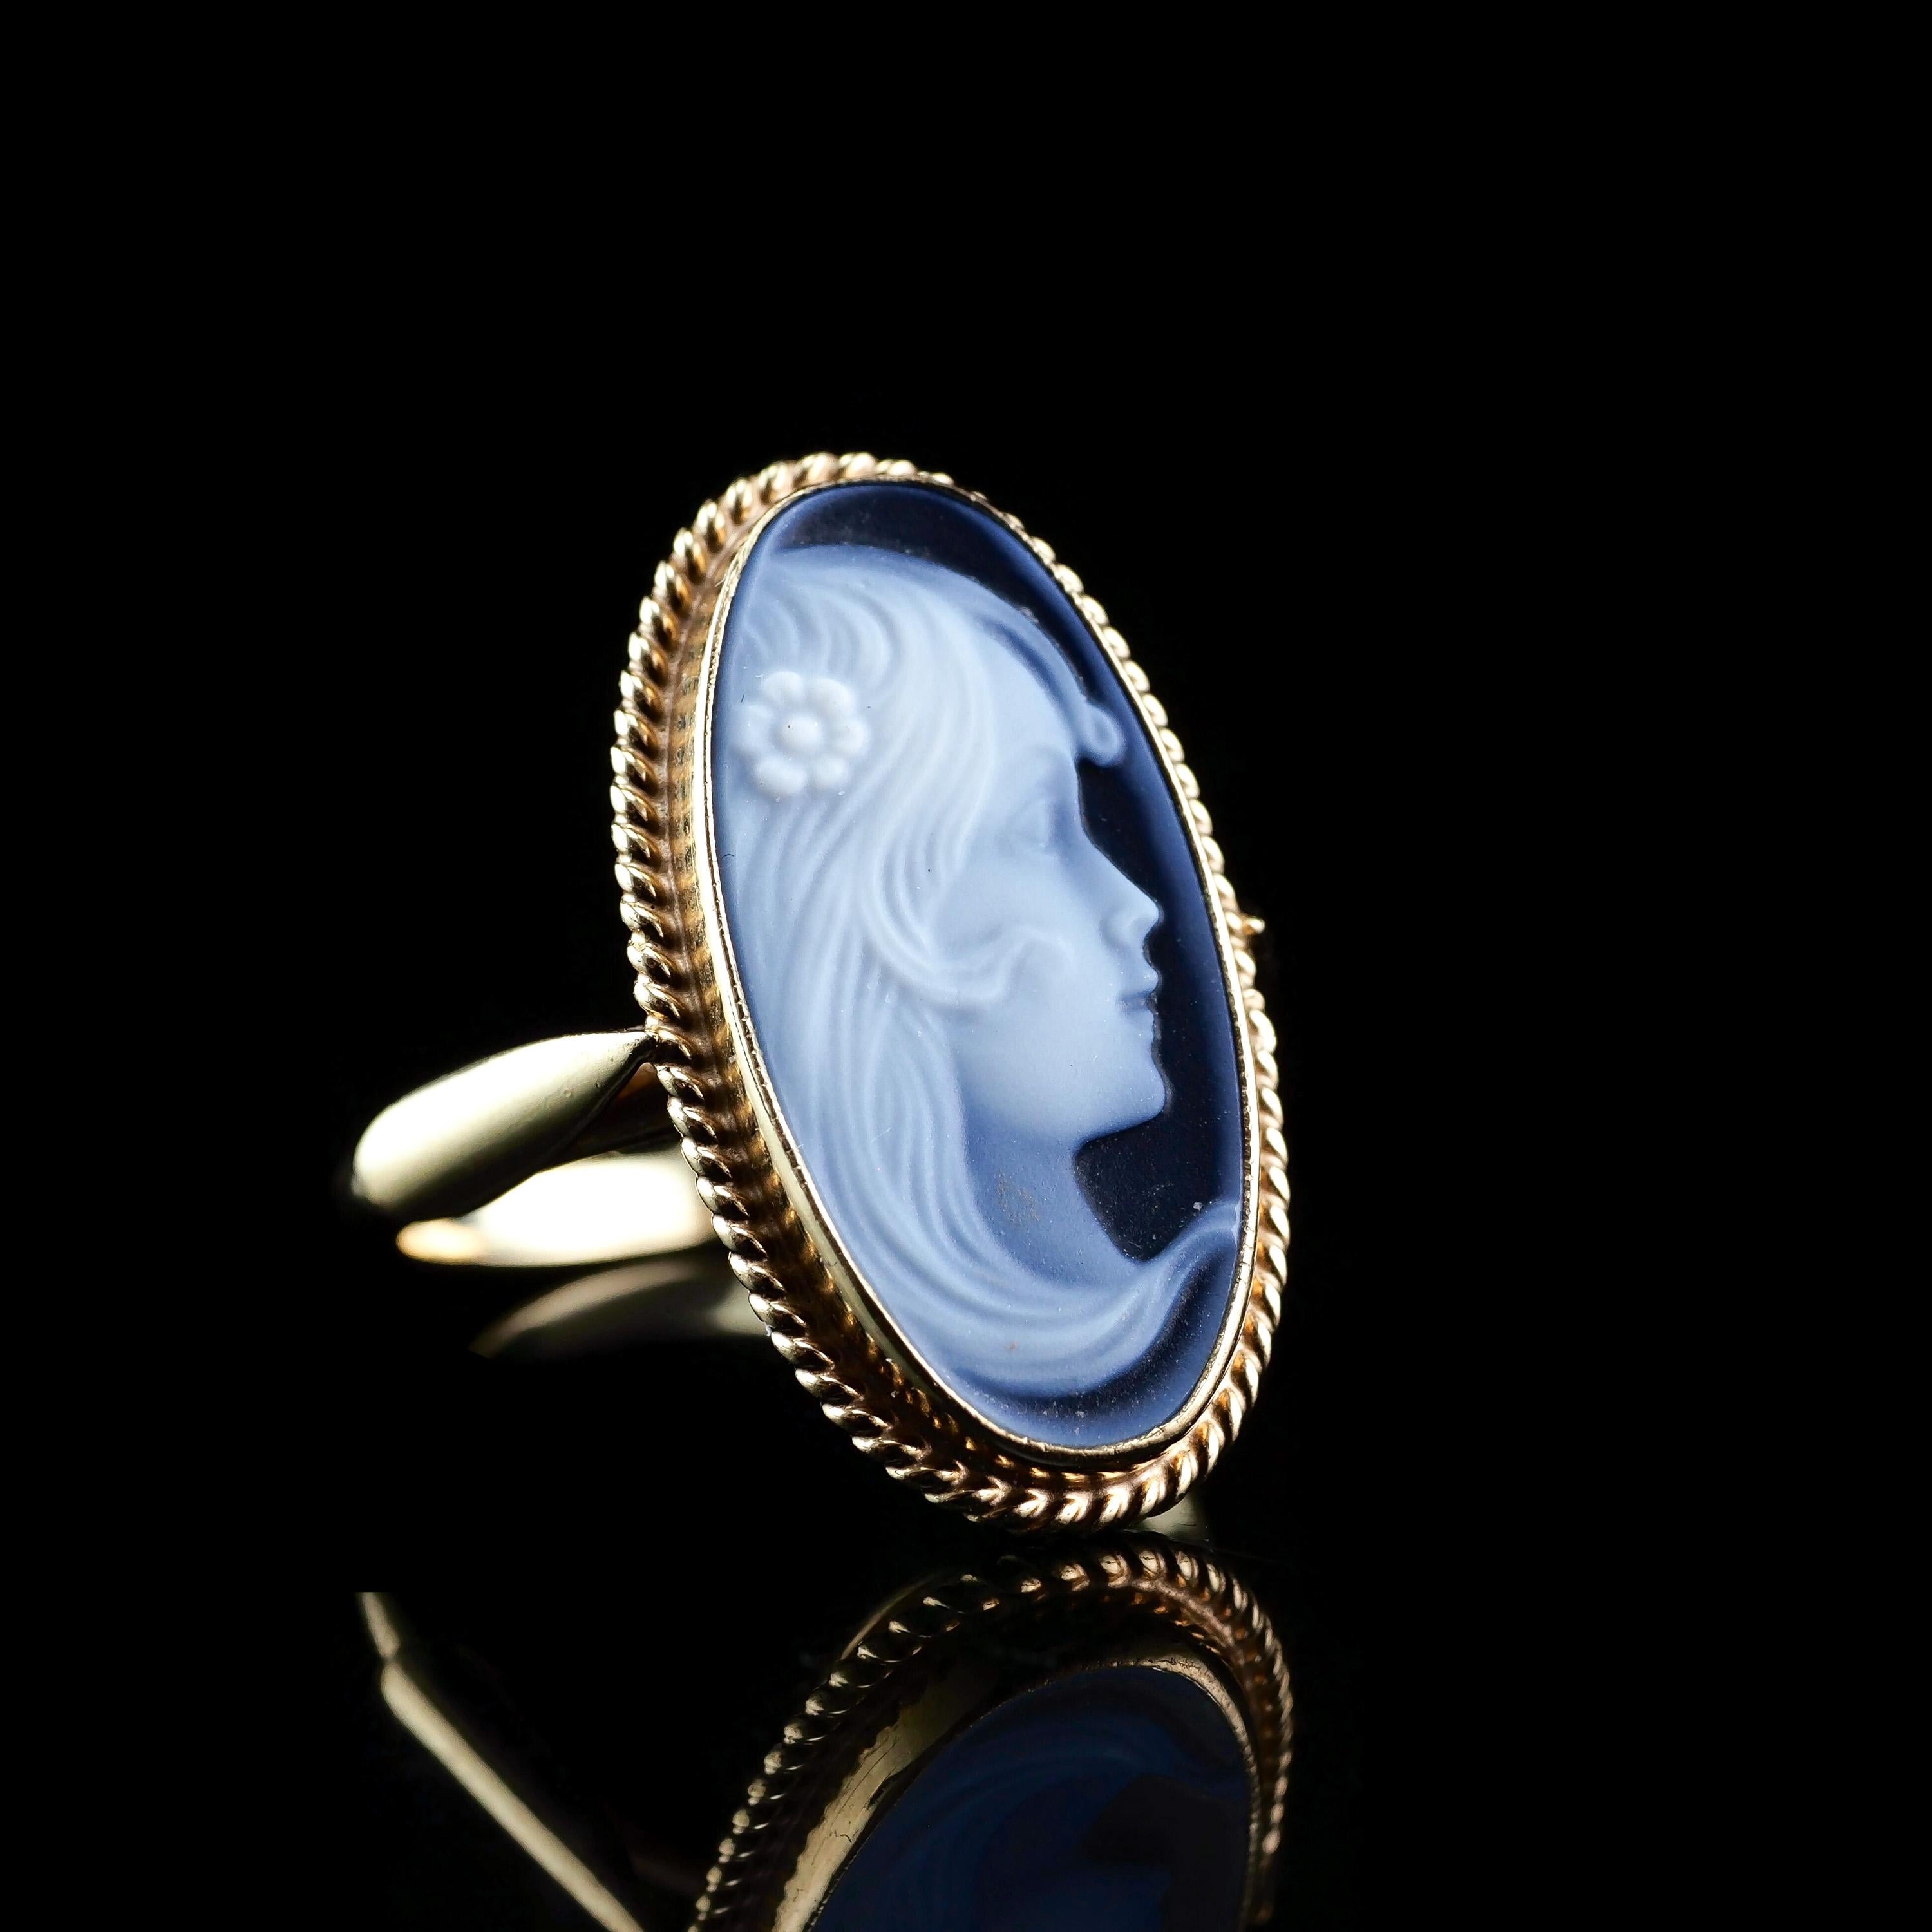 Oval Cut 9 Carat Gold Agate Cameo Ring with Beautiful Figural Maiden Head